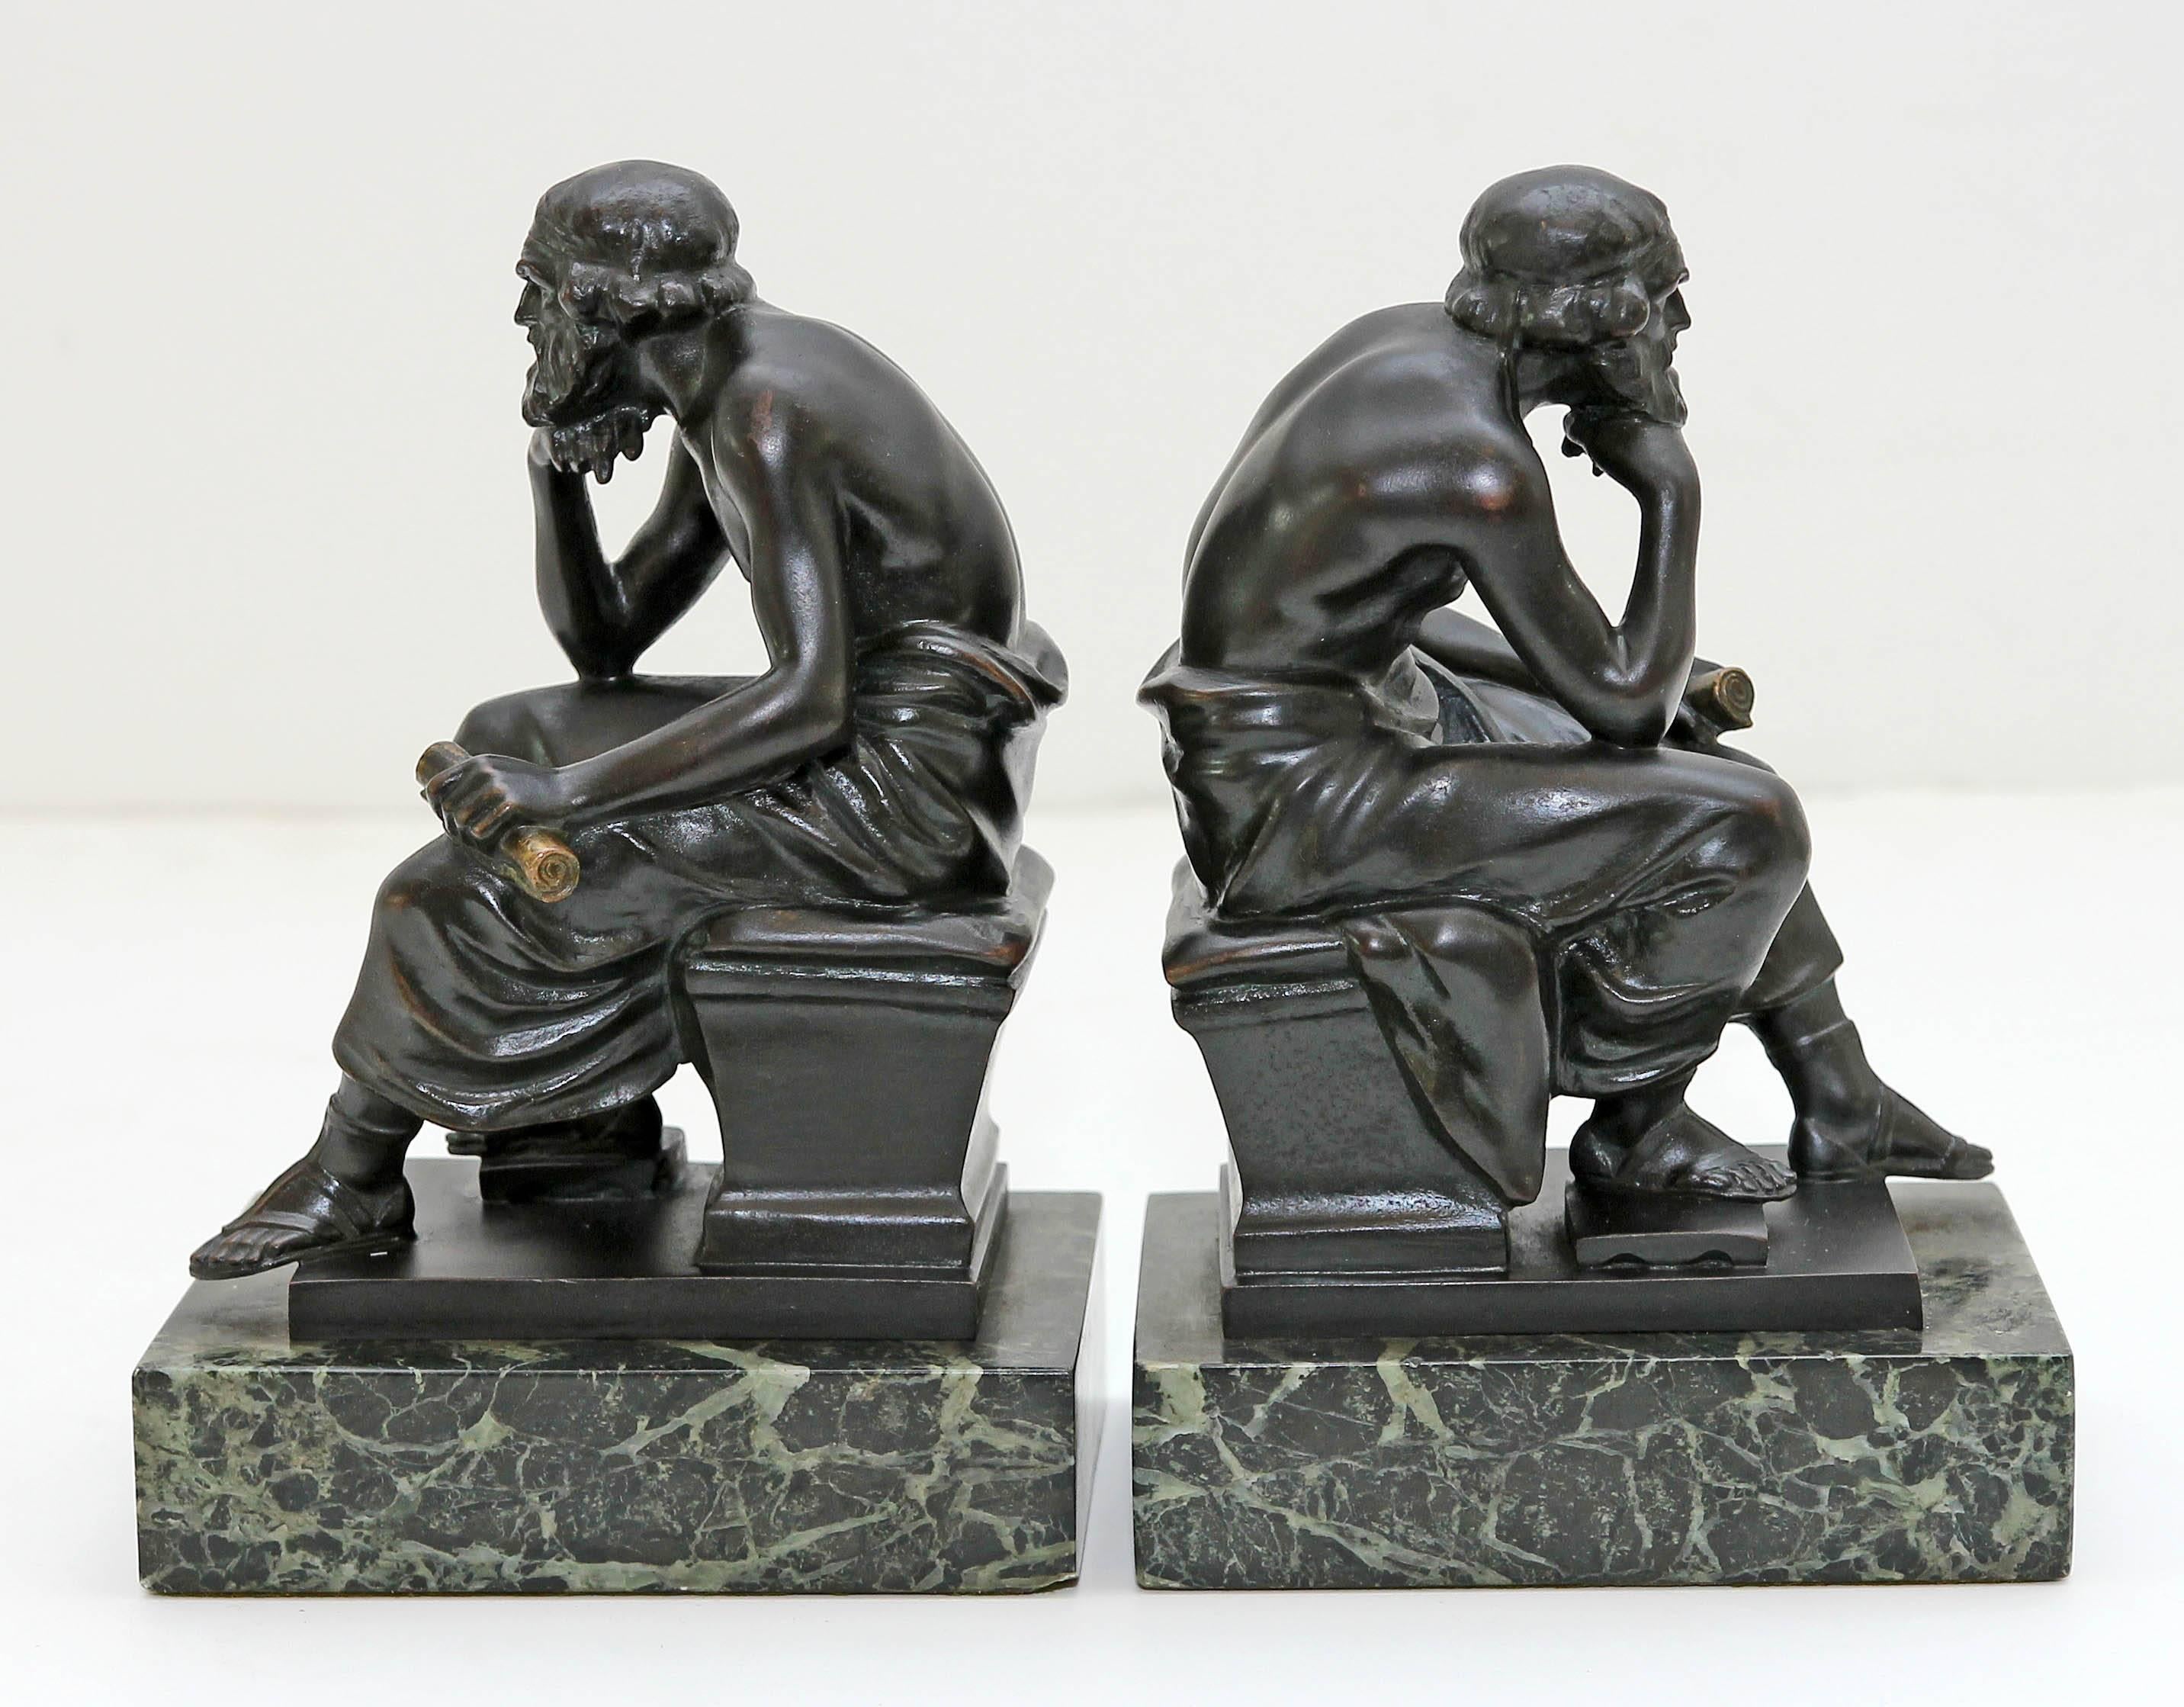 Socrates seated, pair bronze and marble bookends. Artist signed "Th. Ullmann, Austria" circa 1920.